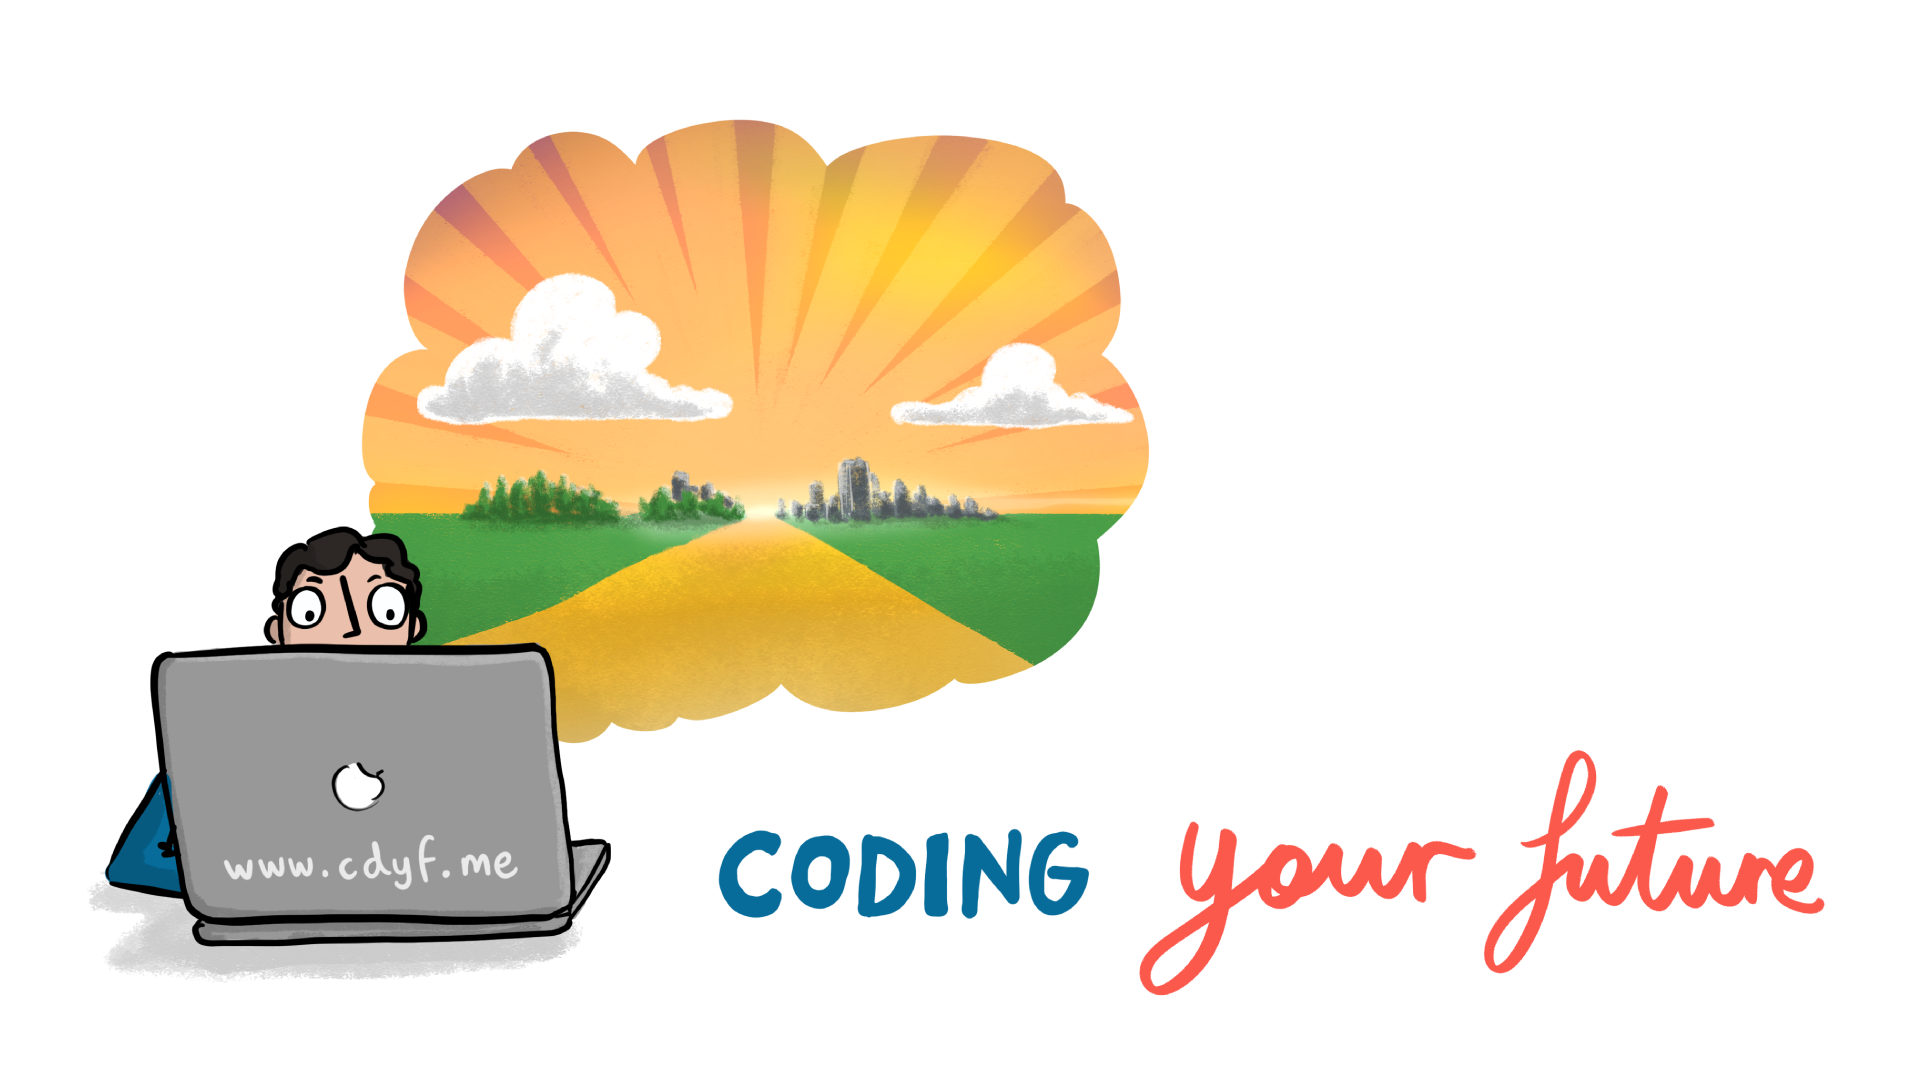 Coding your Future is a guidebook to help students design, build, test and code their futures in computing, see www.cdyf.me. Coding your Future illustration by Visual Thinkery is licensed under CC-BY-ND